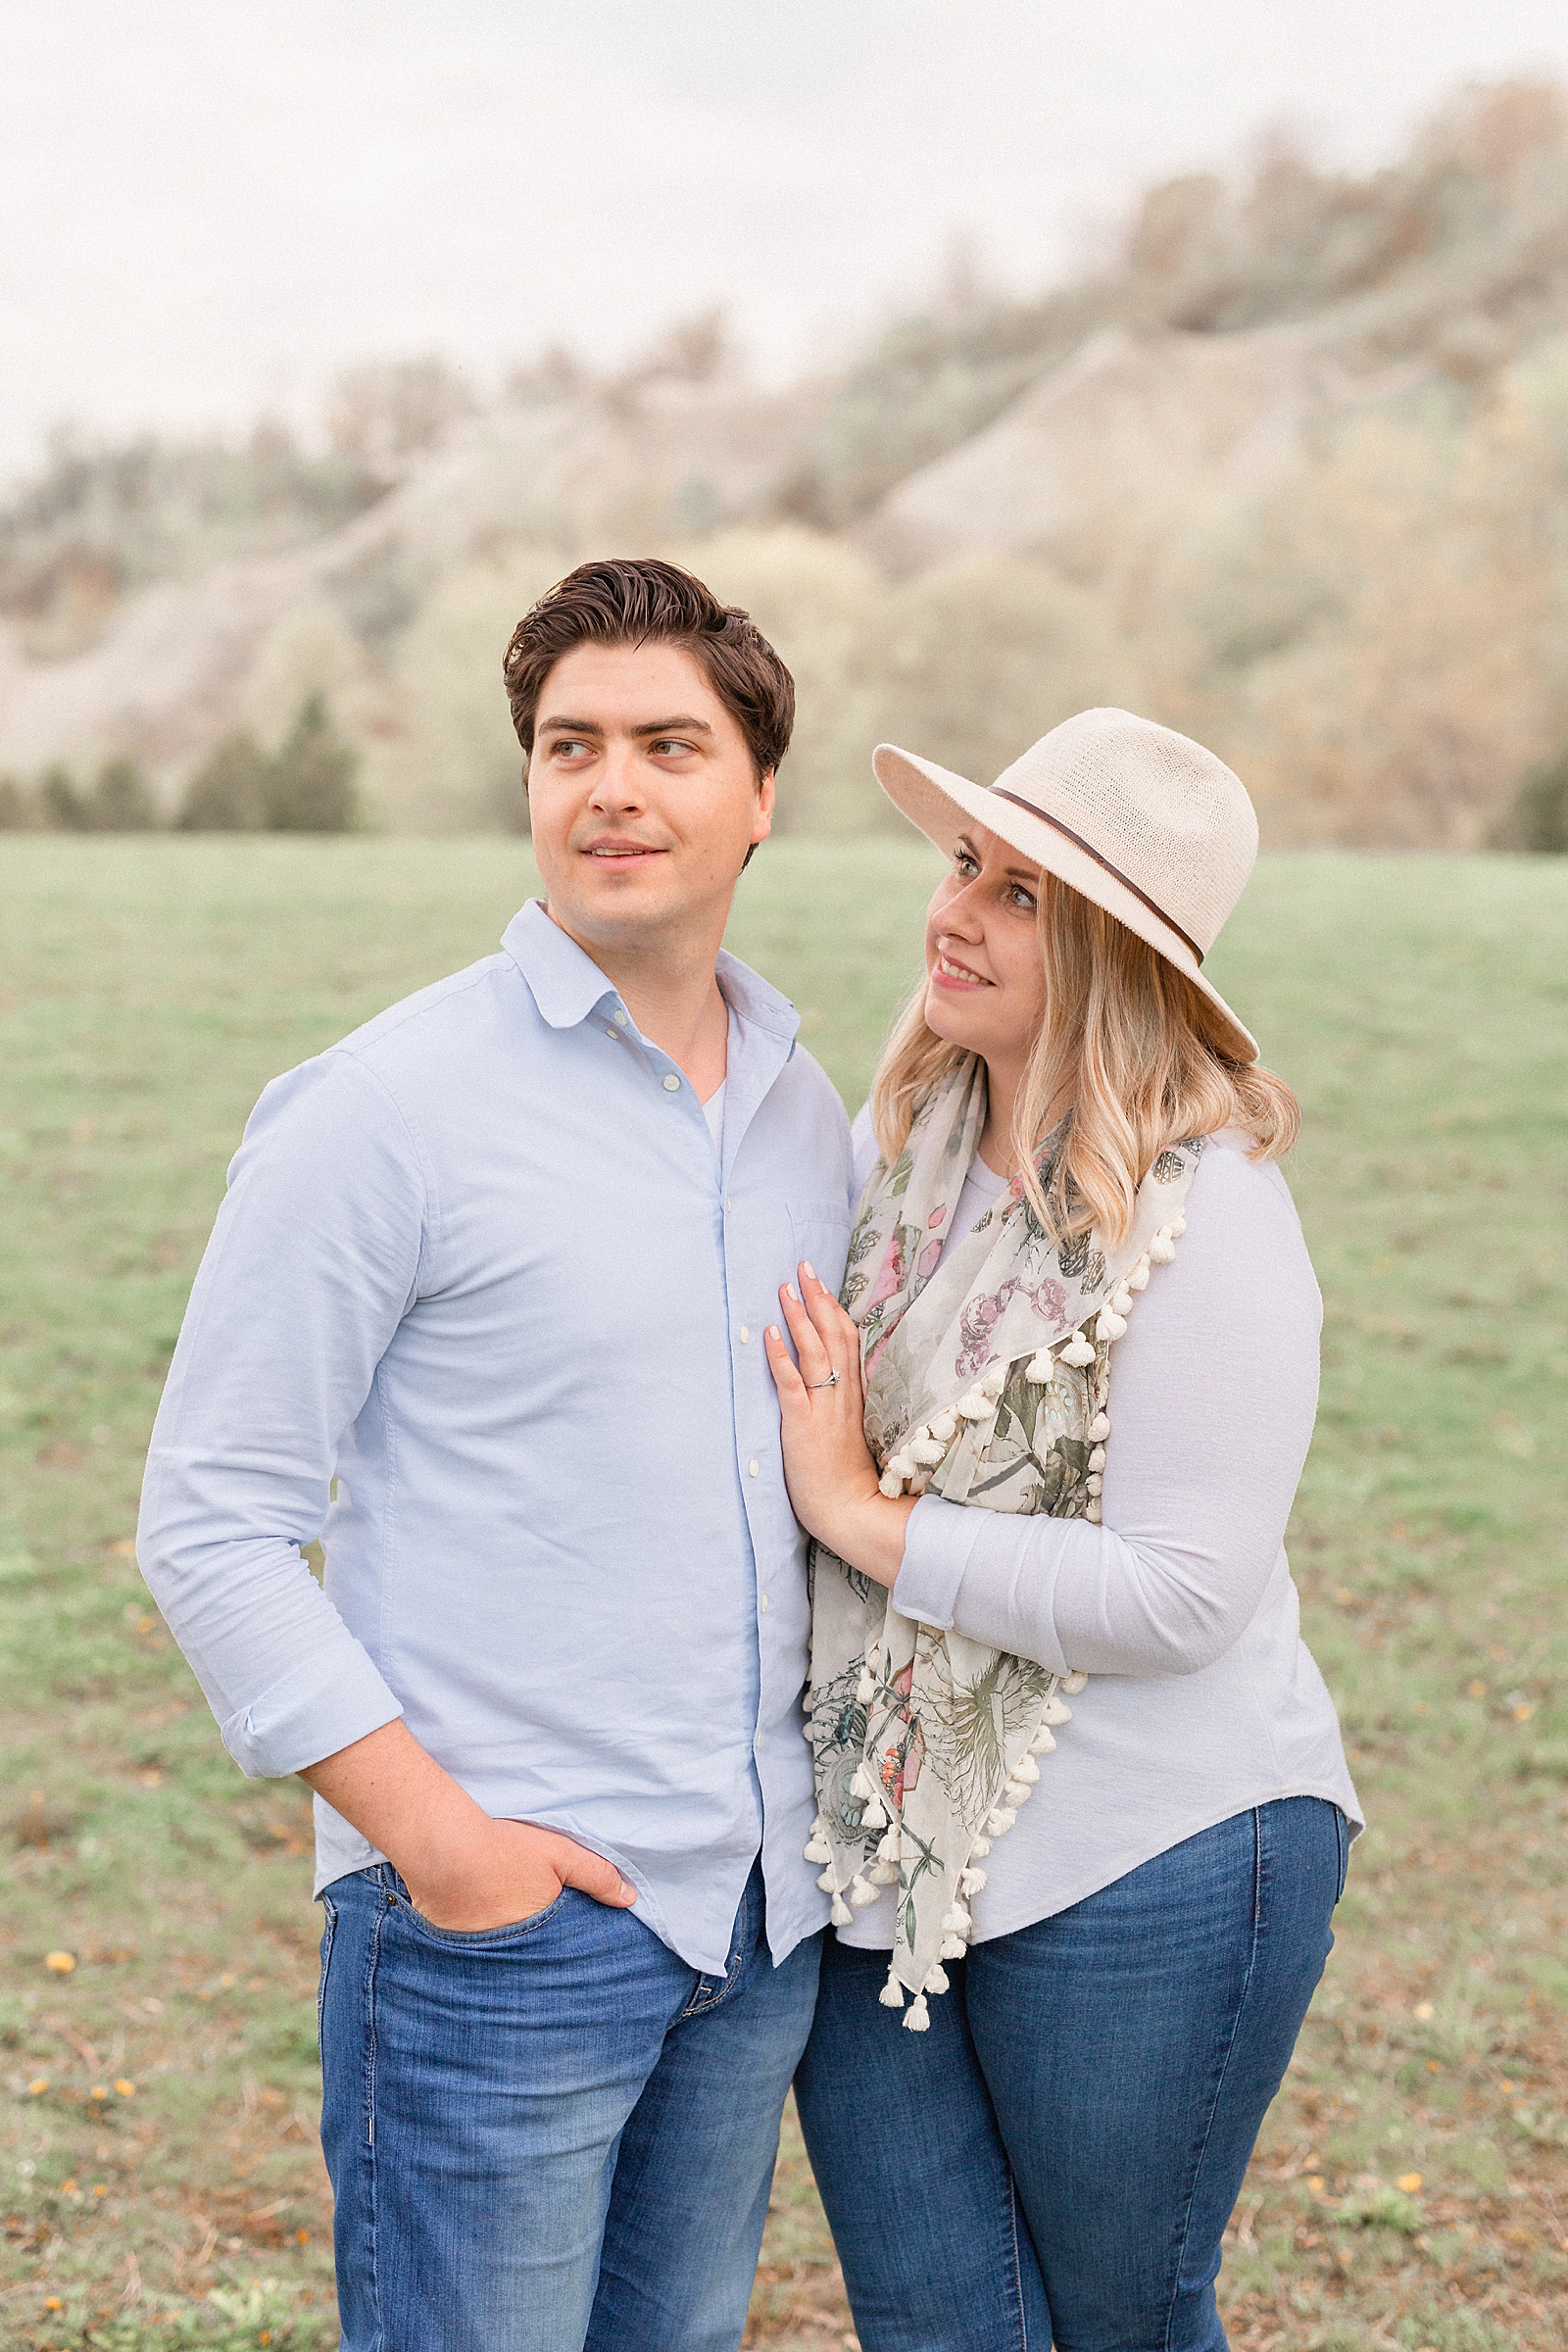 Scarborough Bluffs Engagement Session in the Spring Time